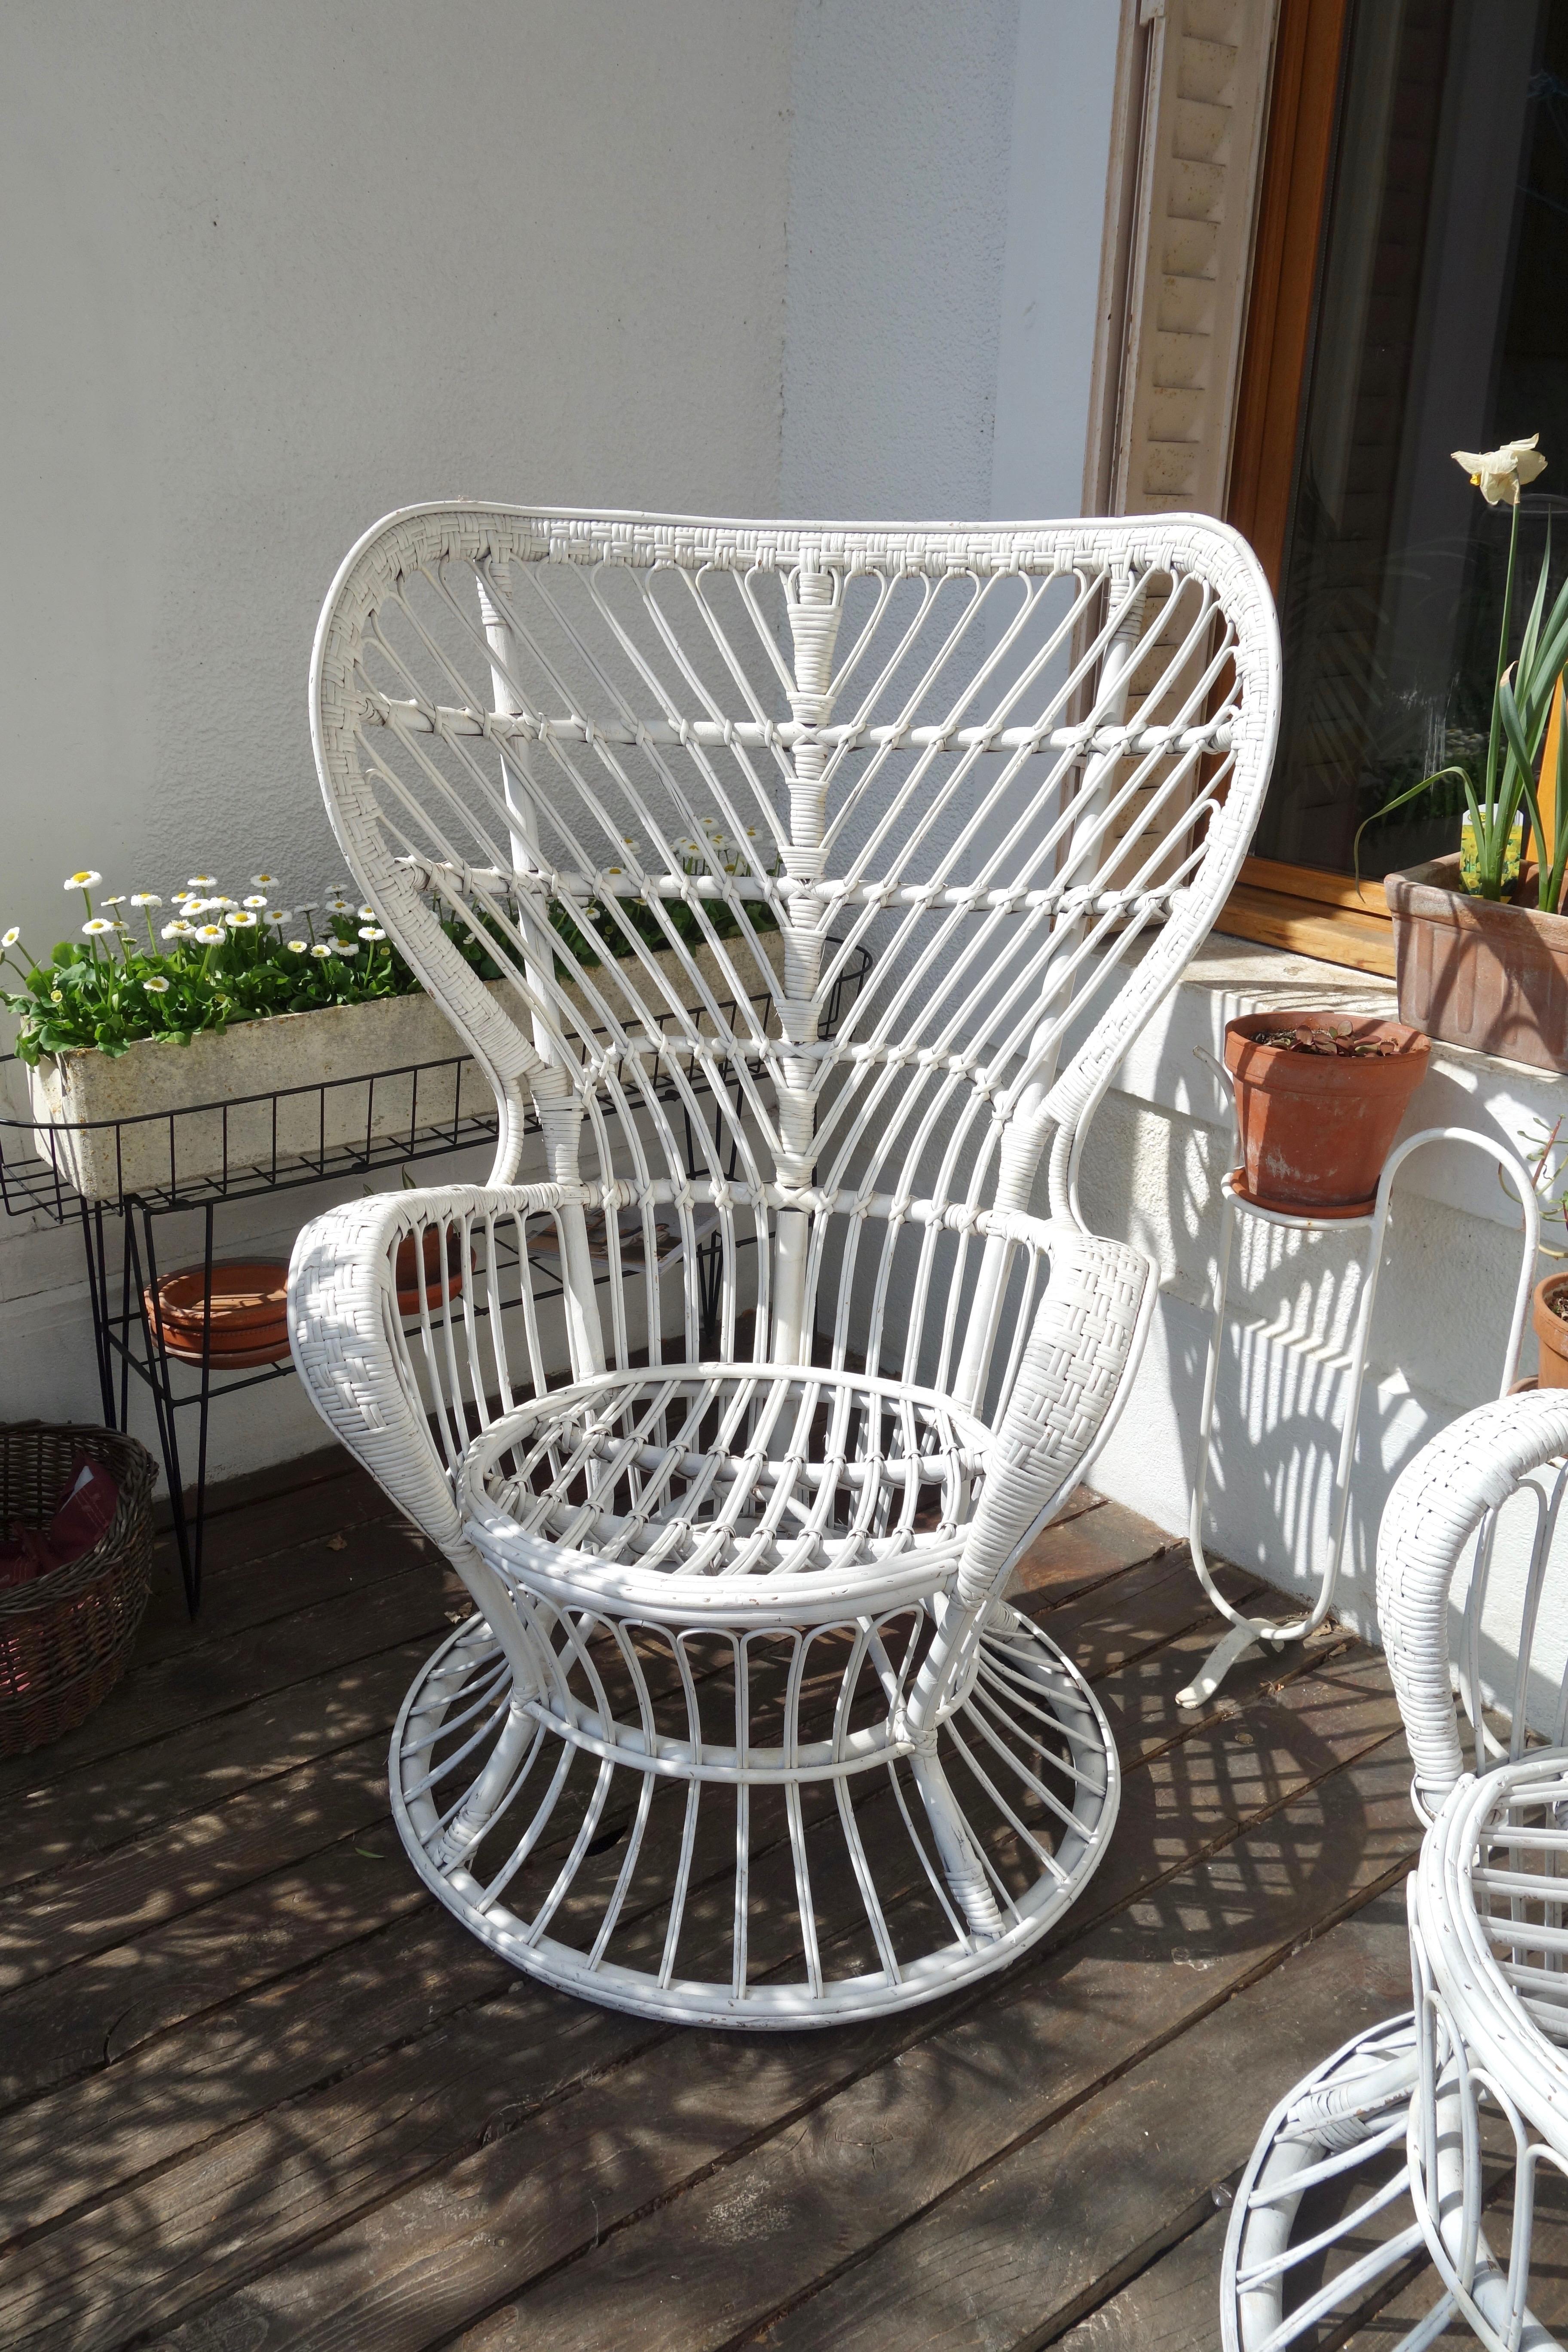 Pair of rattan armchairs by Lio Carminati for Bonacina. Italian handmade manufacture of the 1950s. Model created for the ship Conte Biancamaro. In its original state. In good condition: beautiful patina, white painted at one time, comfortable